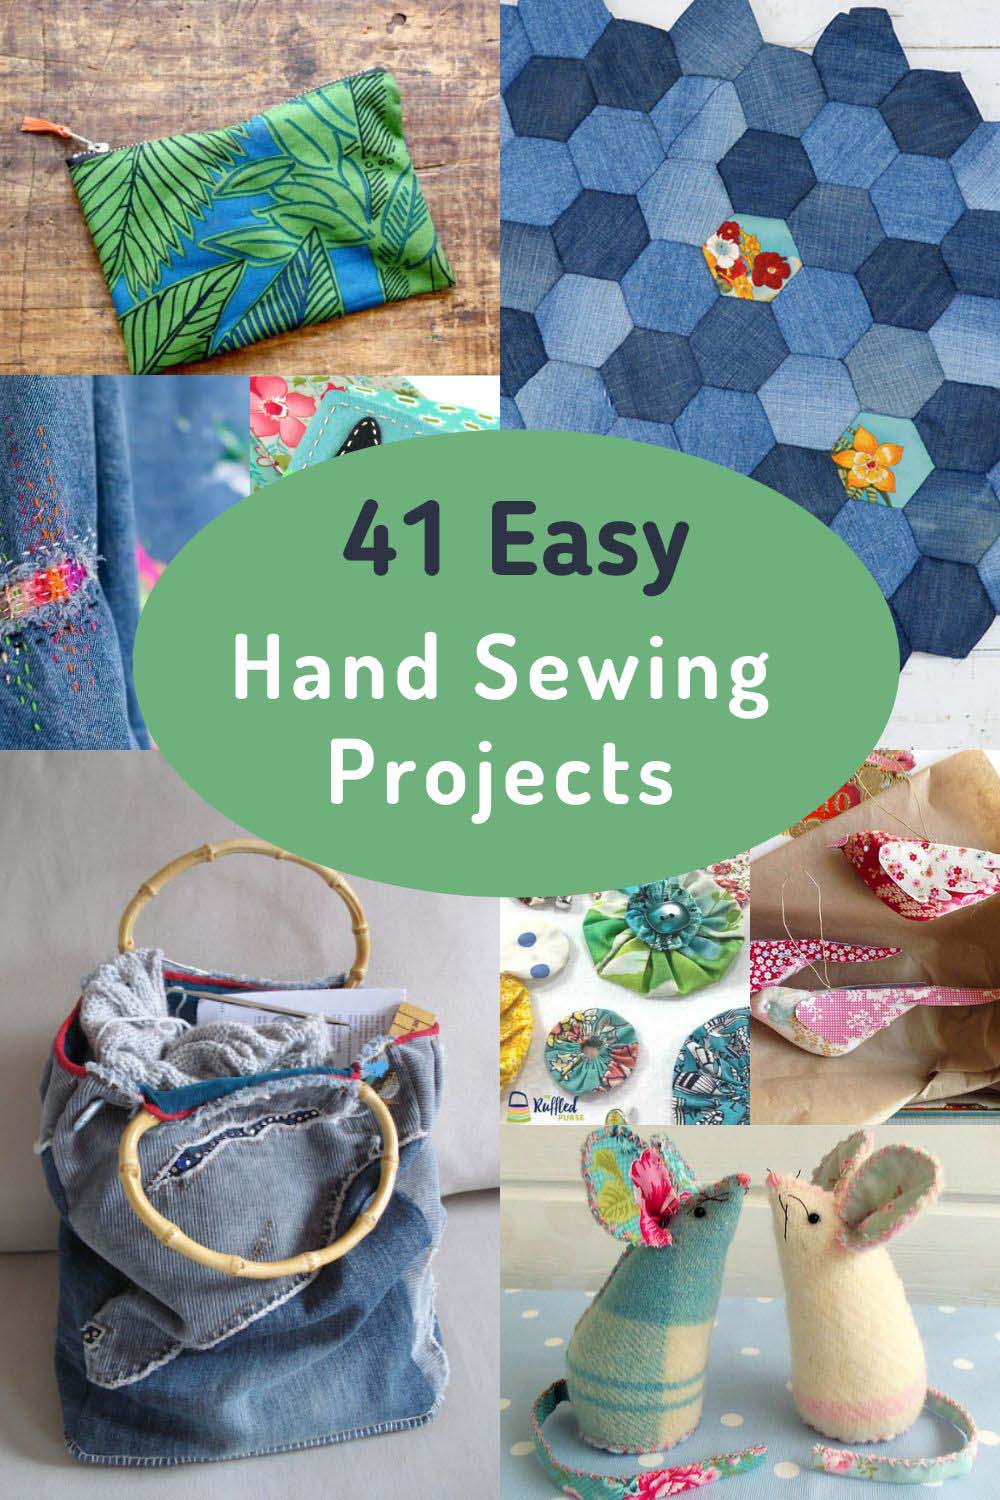 Easy and Fun Sewing Projects for Kids - The Activity Mom